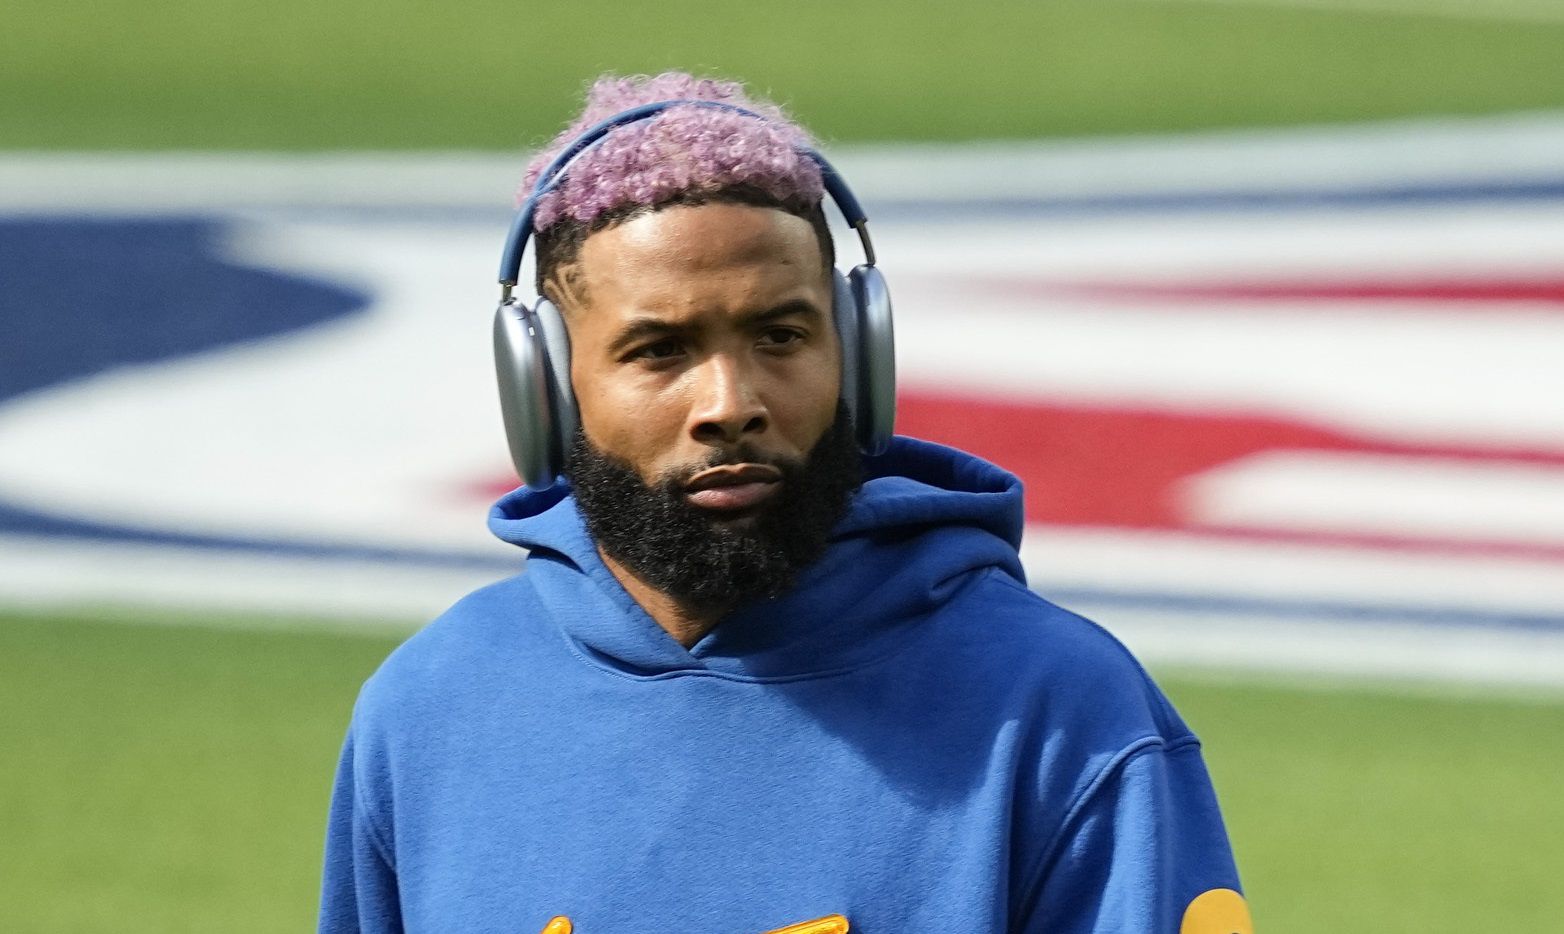 Image of OBJ with the Rams in 2021